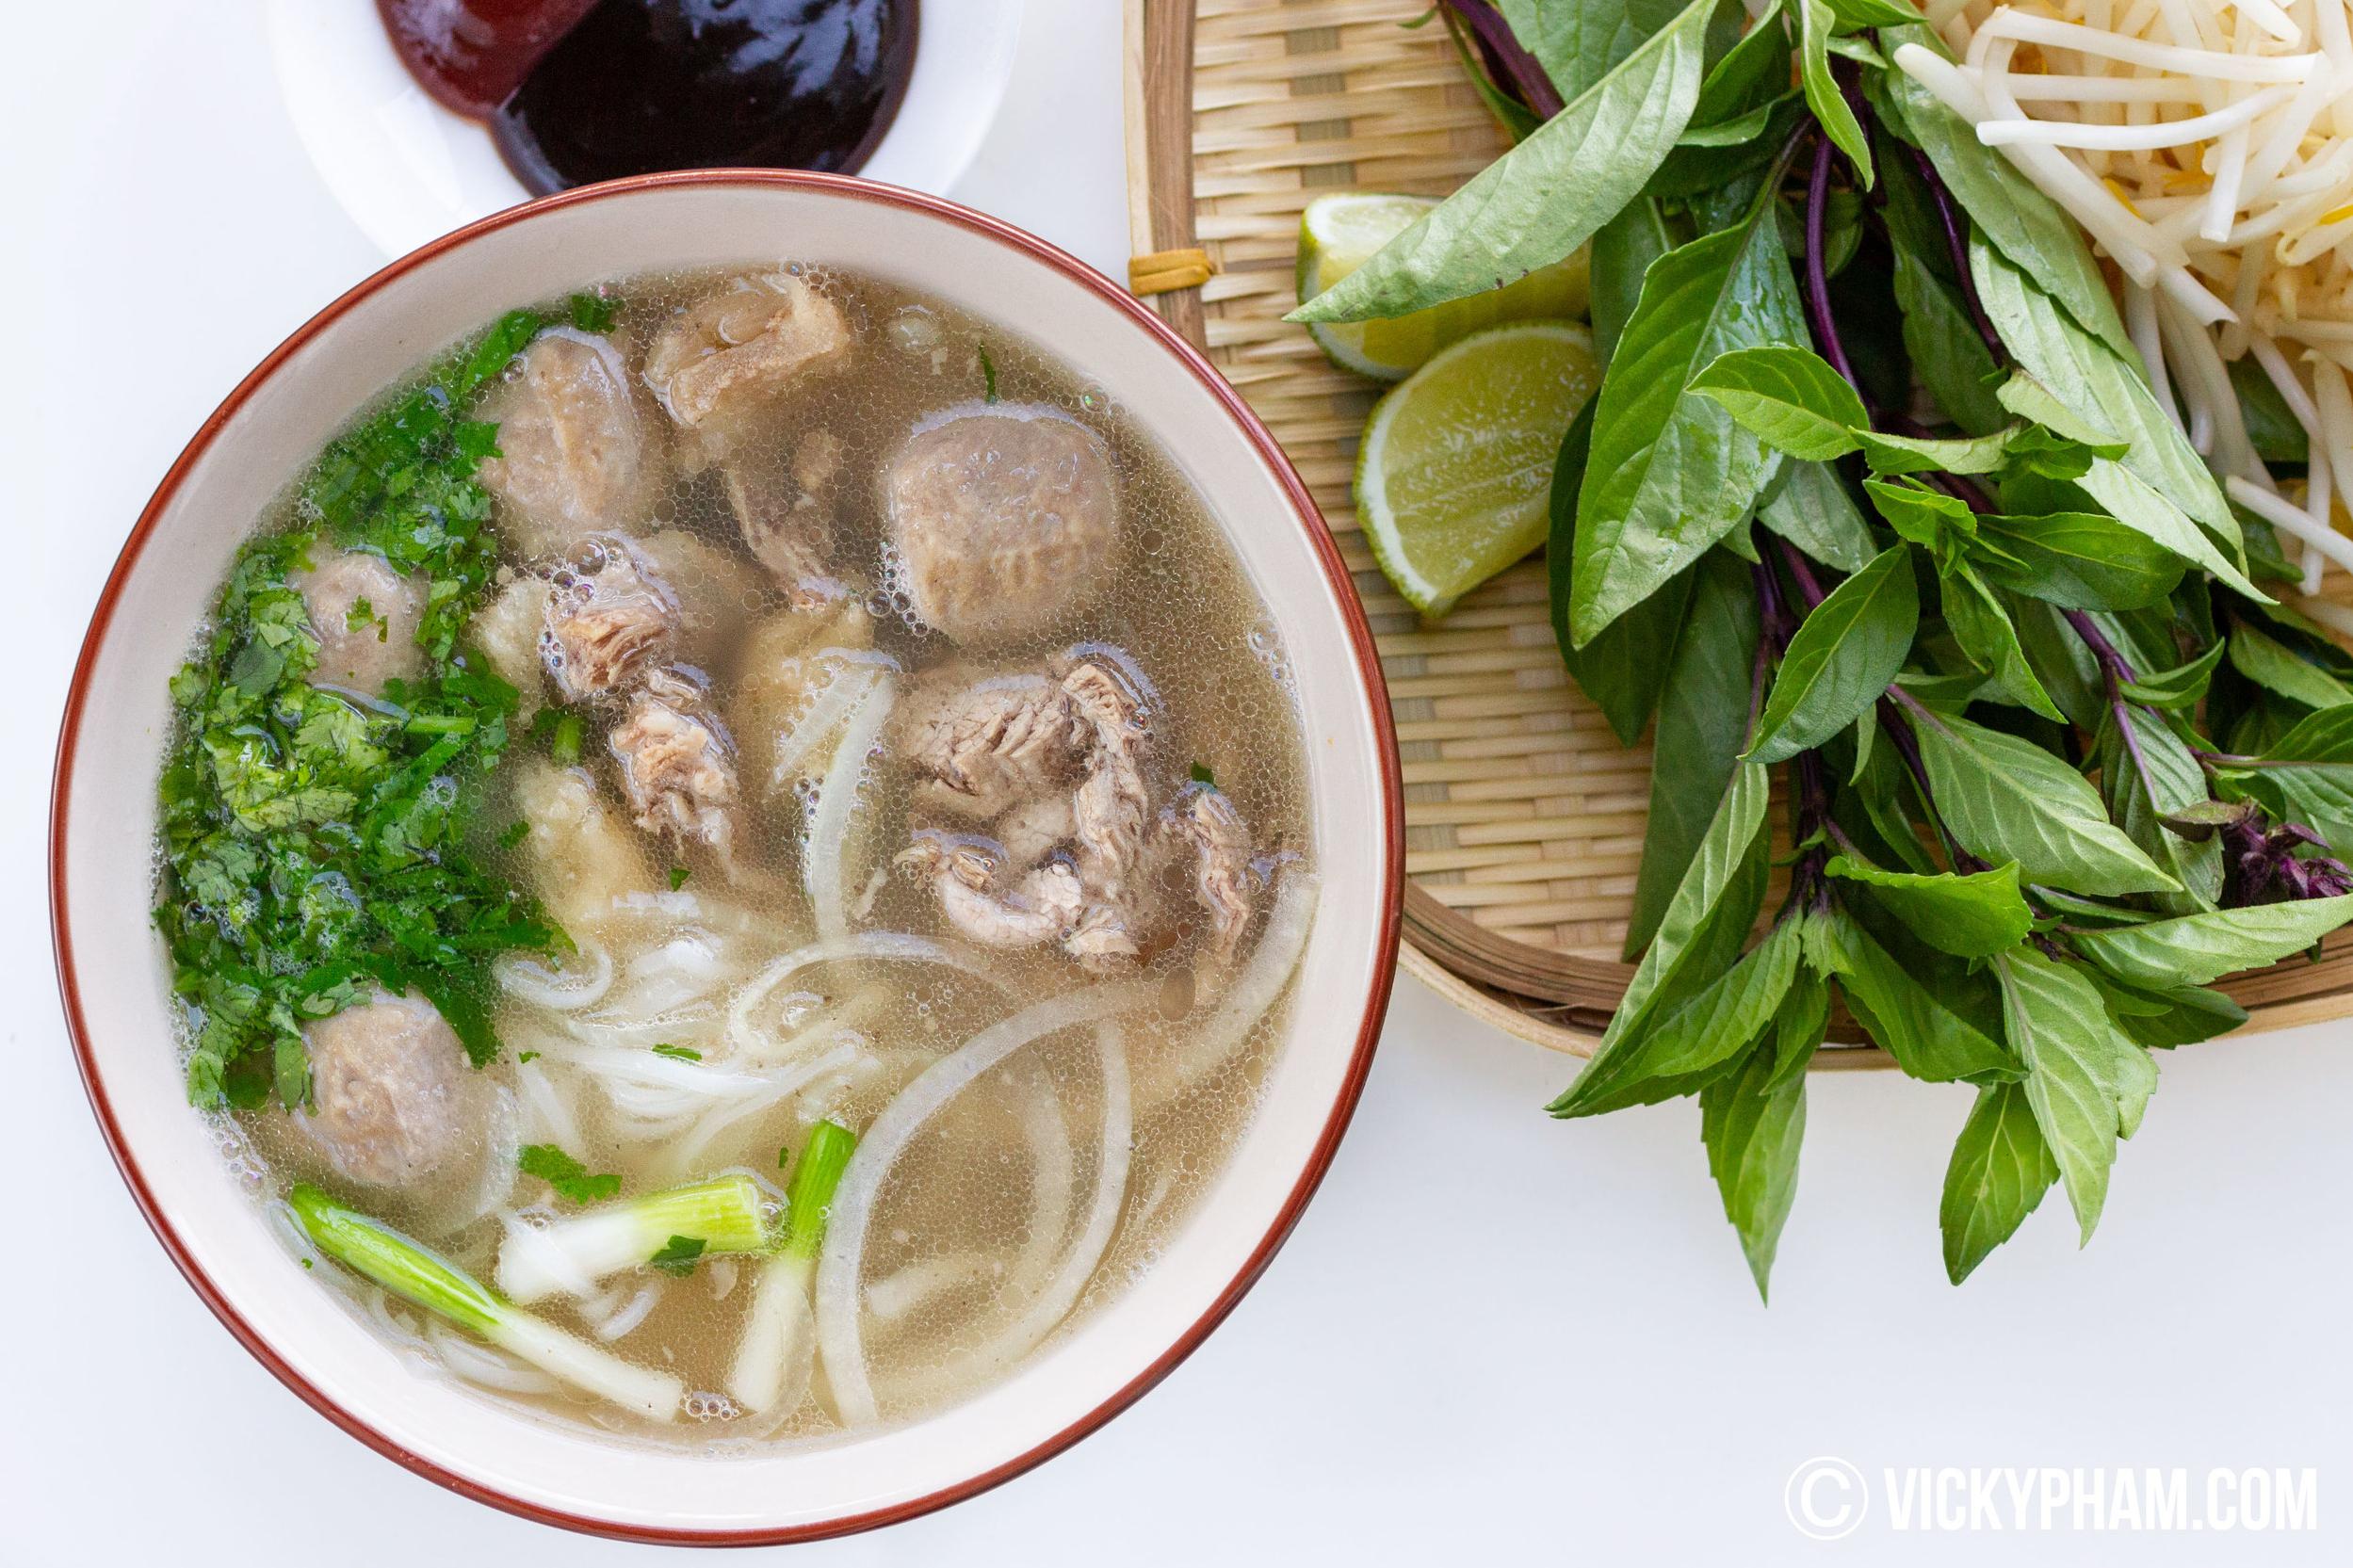  The perfect bowl of comfort on a chilly day - Beef Pho Bo.